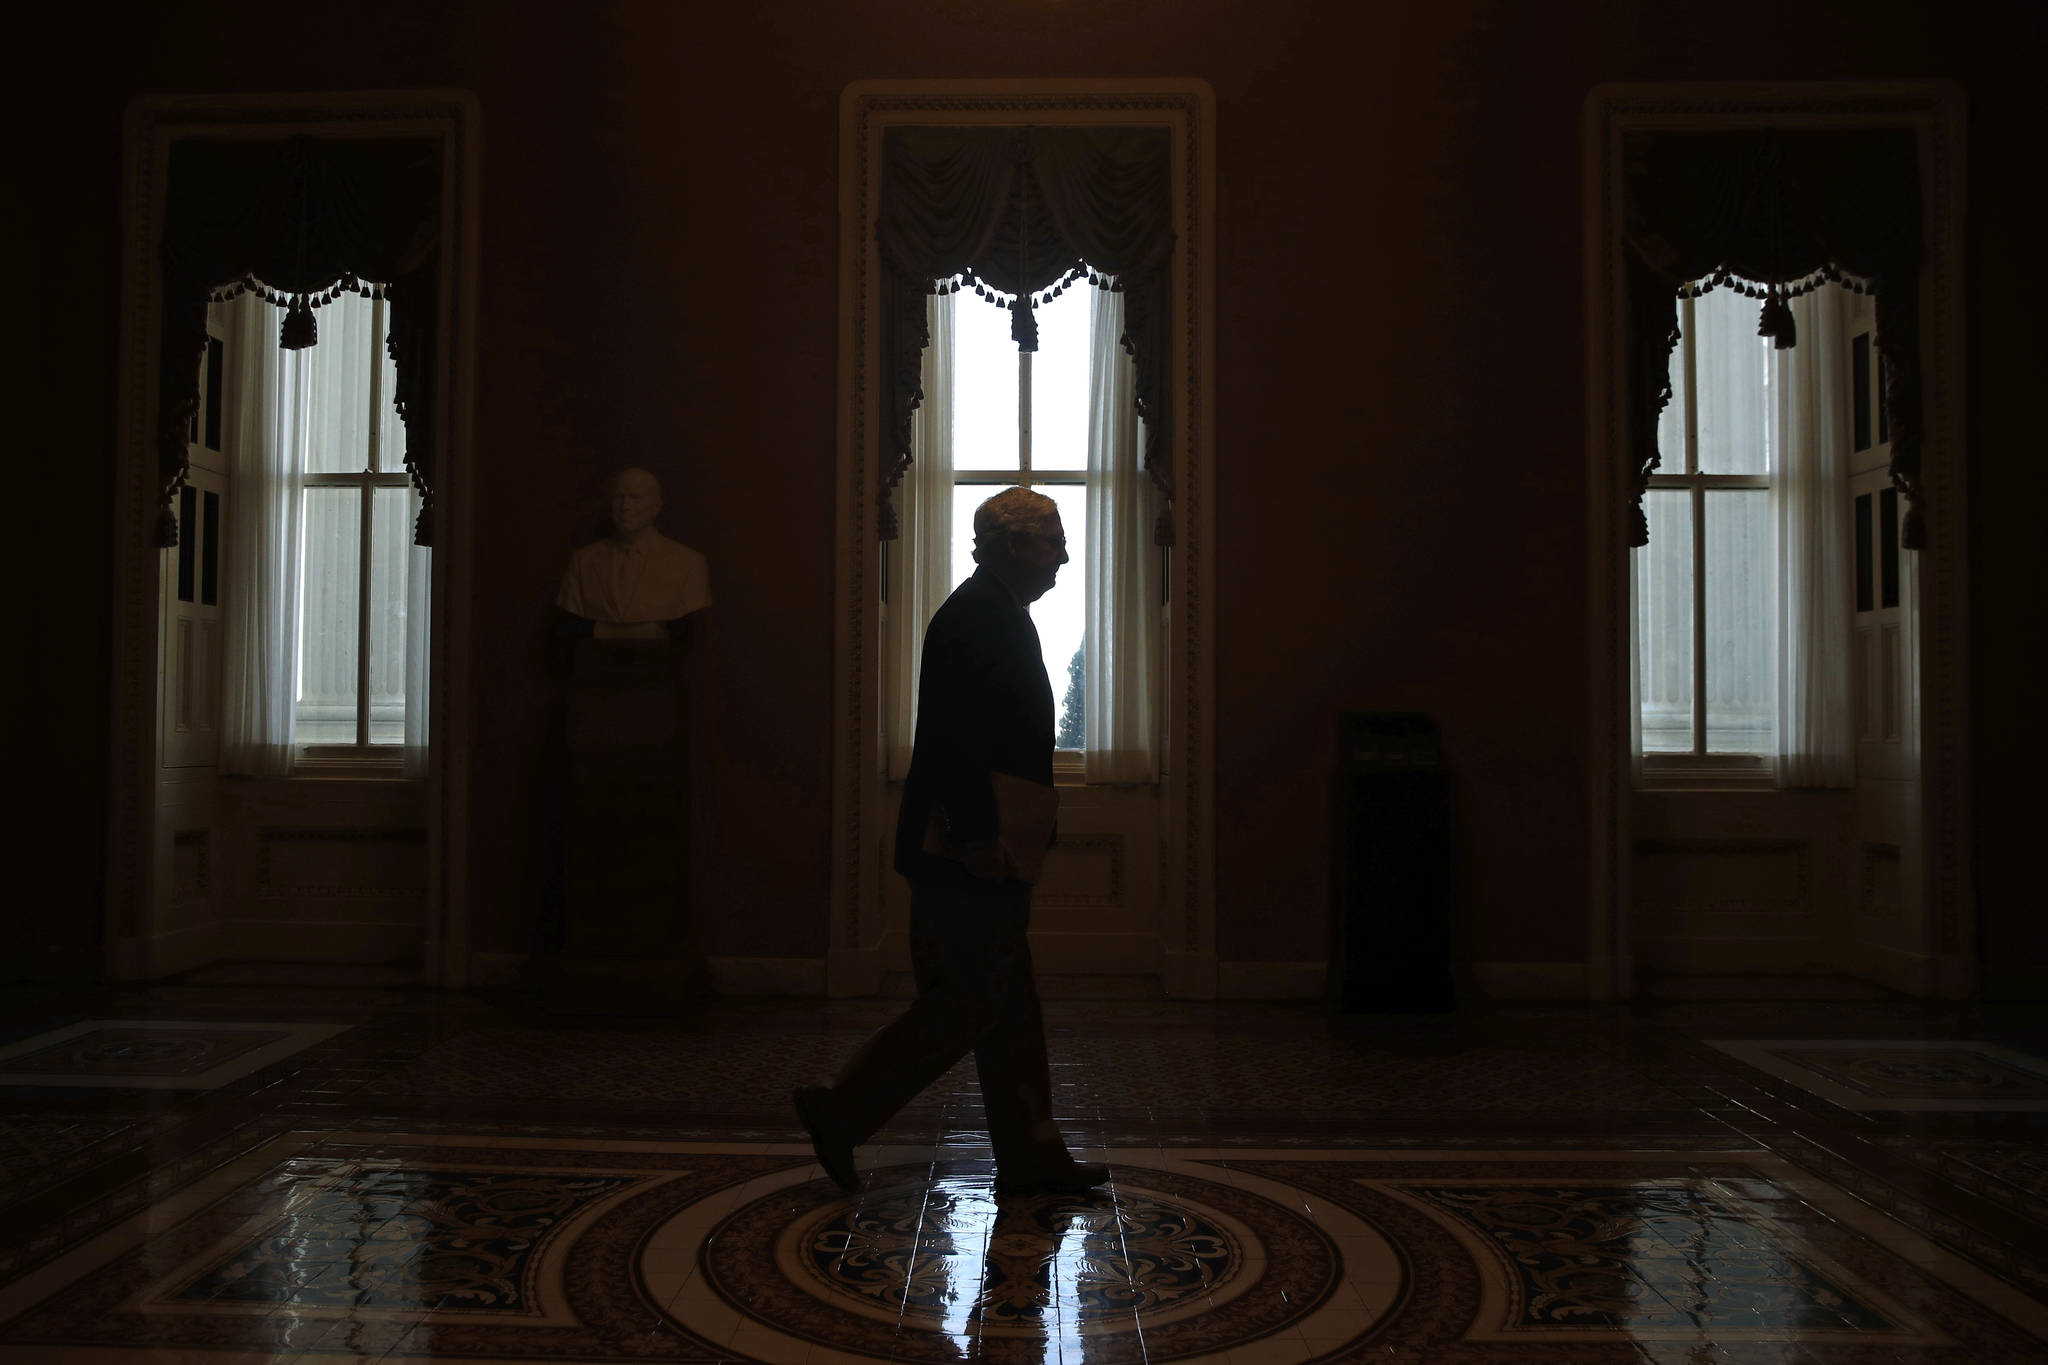 In this April 2020 photo Senate Majority Leader Mitch McConnell of Kentucky, walks to the Senate chamber on Capitol Hill in Washington. It’s come to this for Republicans straining to defend their Senate majority in November’s elections: They’re air-dropping millions of dollars into races in Alabama, Kentucky and other red states where Donald Trump coasted during his 2016 presidential election triumph. (AP Photo/Patrick Semansky, File)